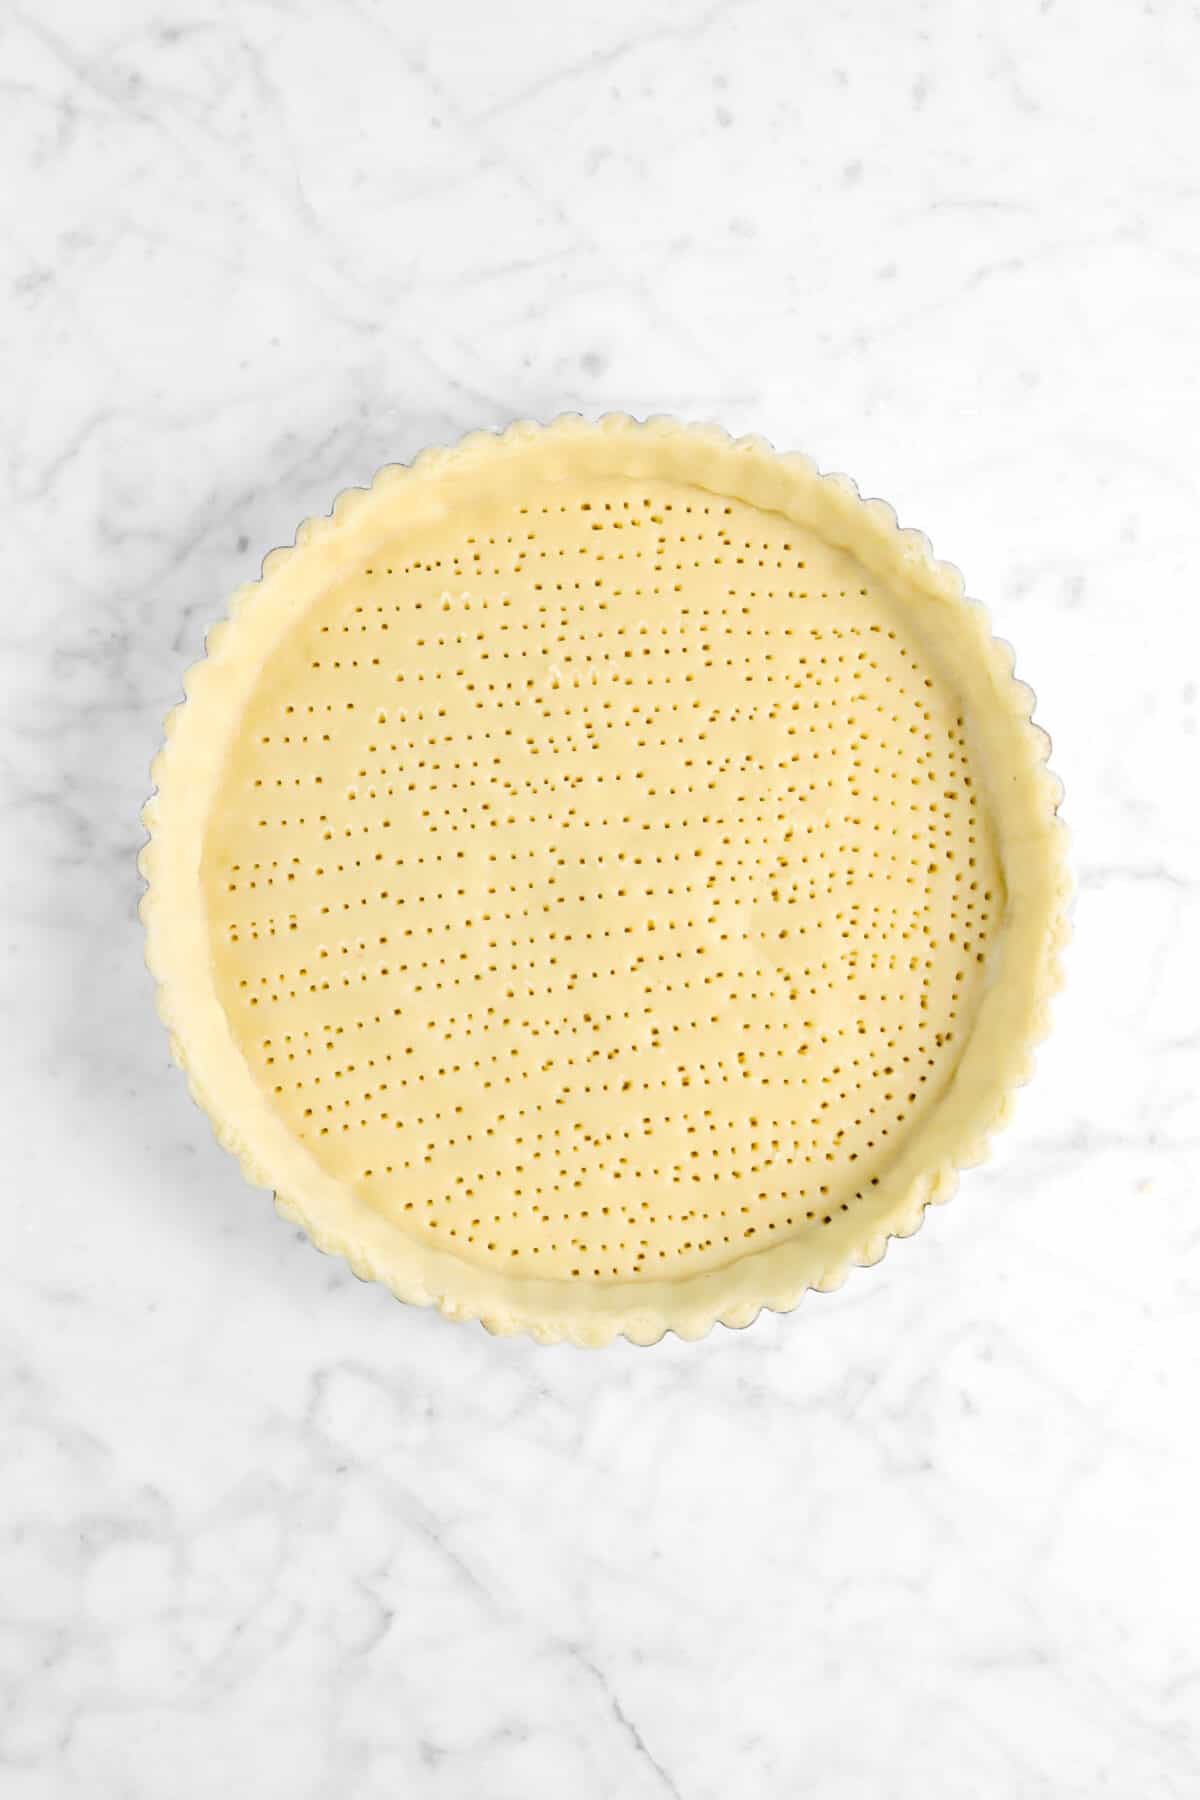 dough in tart pan with bottom pricked with holes